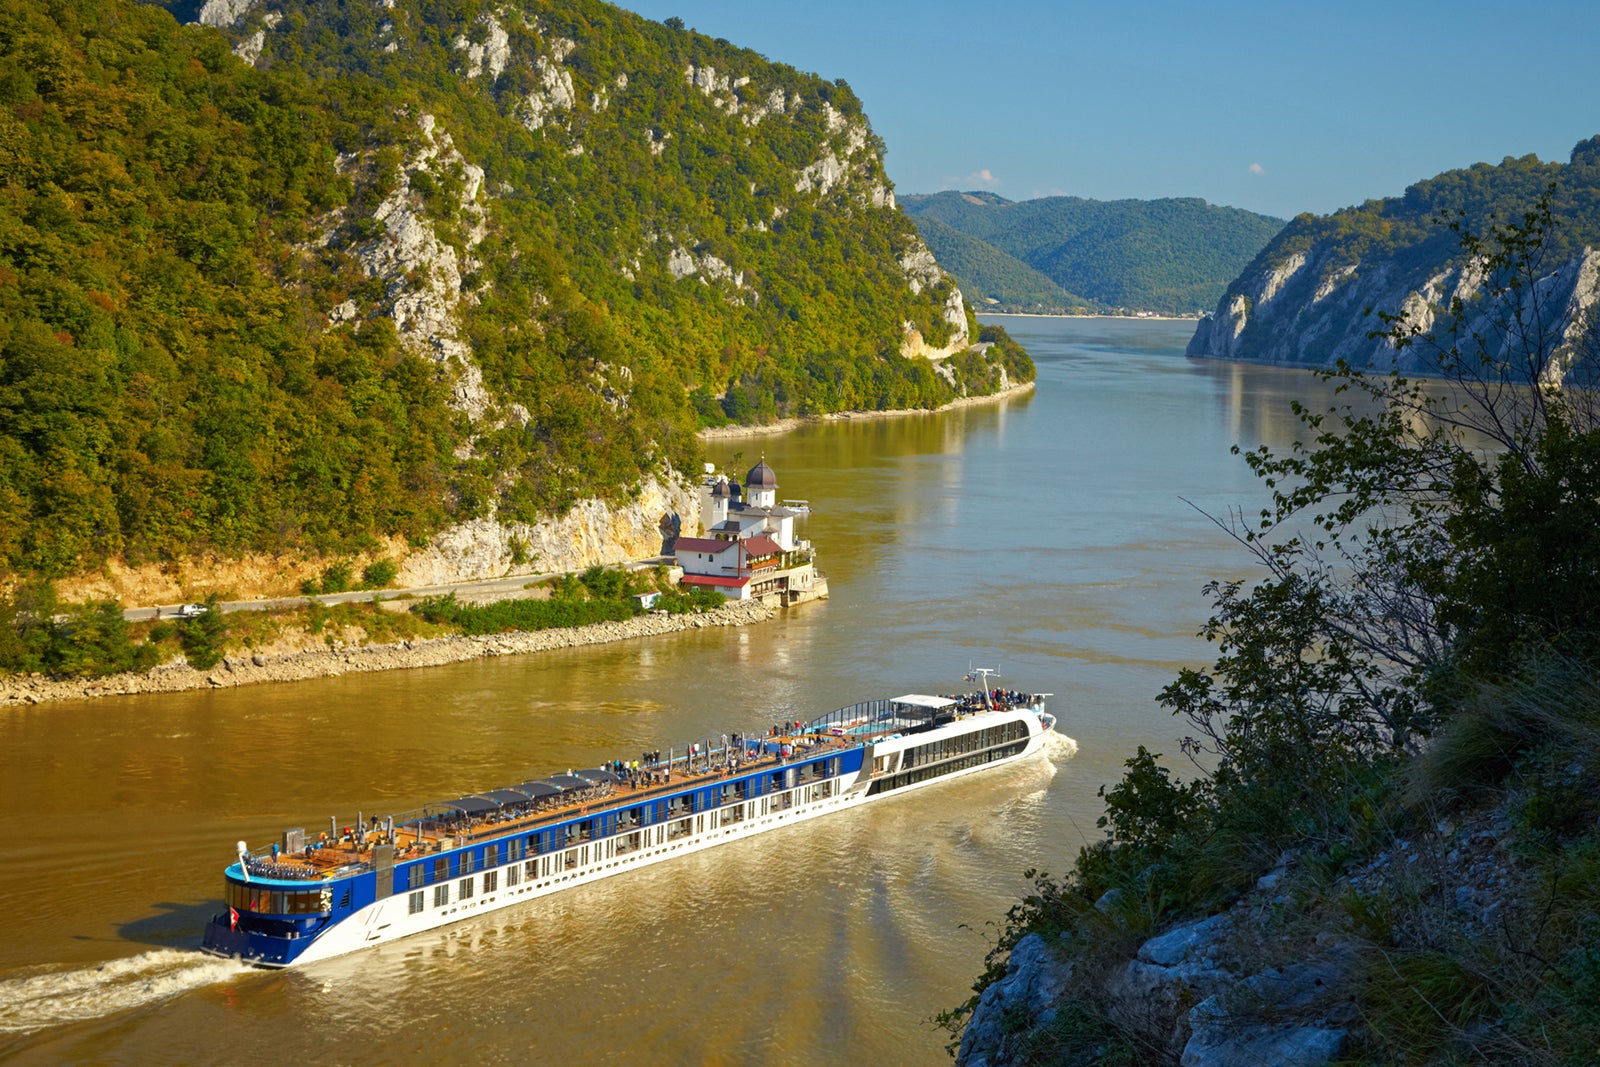 A river cruise ship sailing on the Danube River with mountains rising up on either side